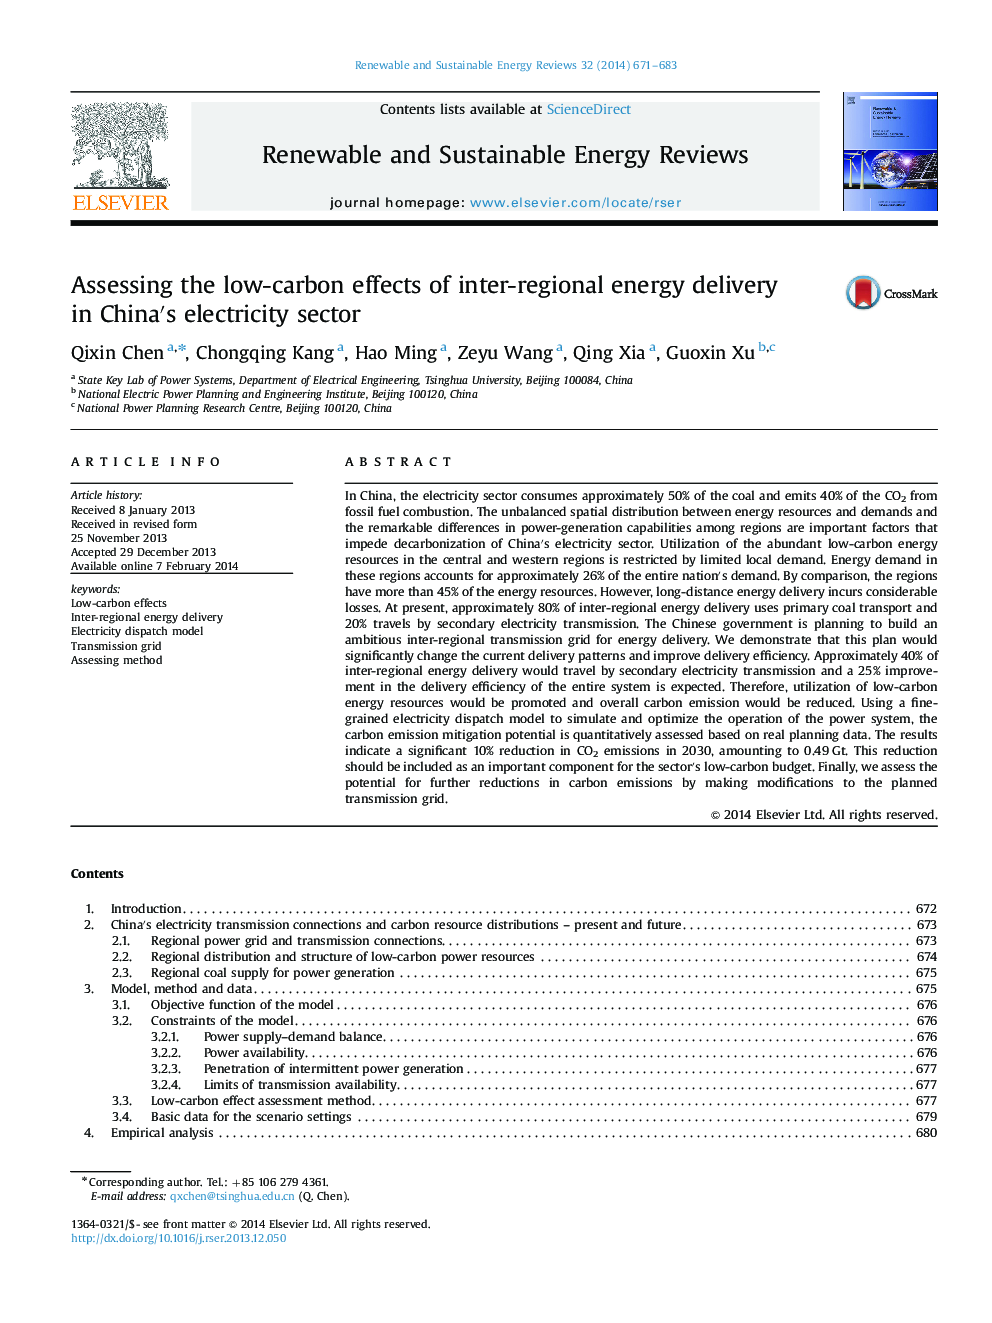 Assessing the low-carbon effects of inter-regional energy delivery in China's electricity sector